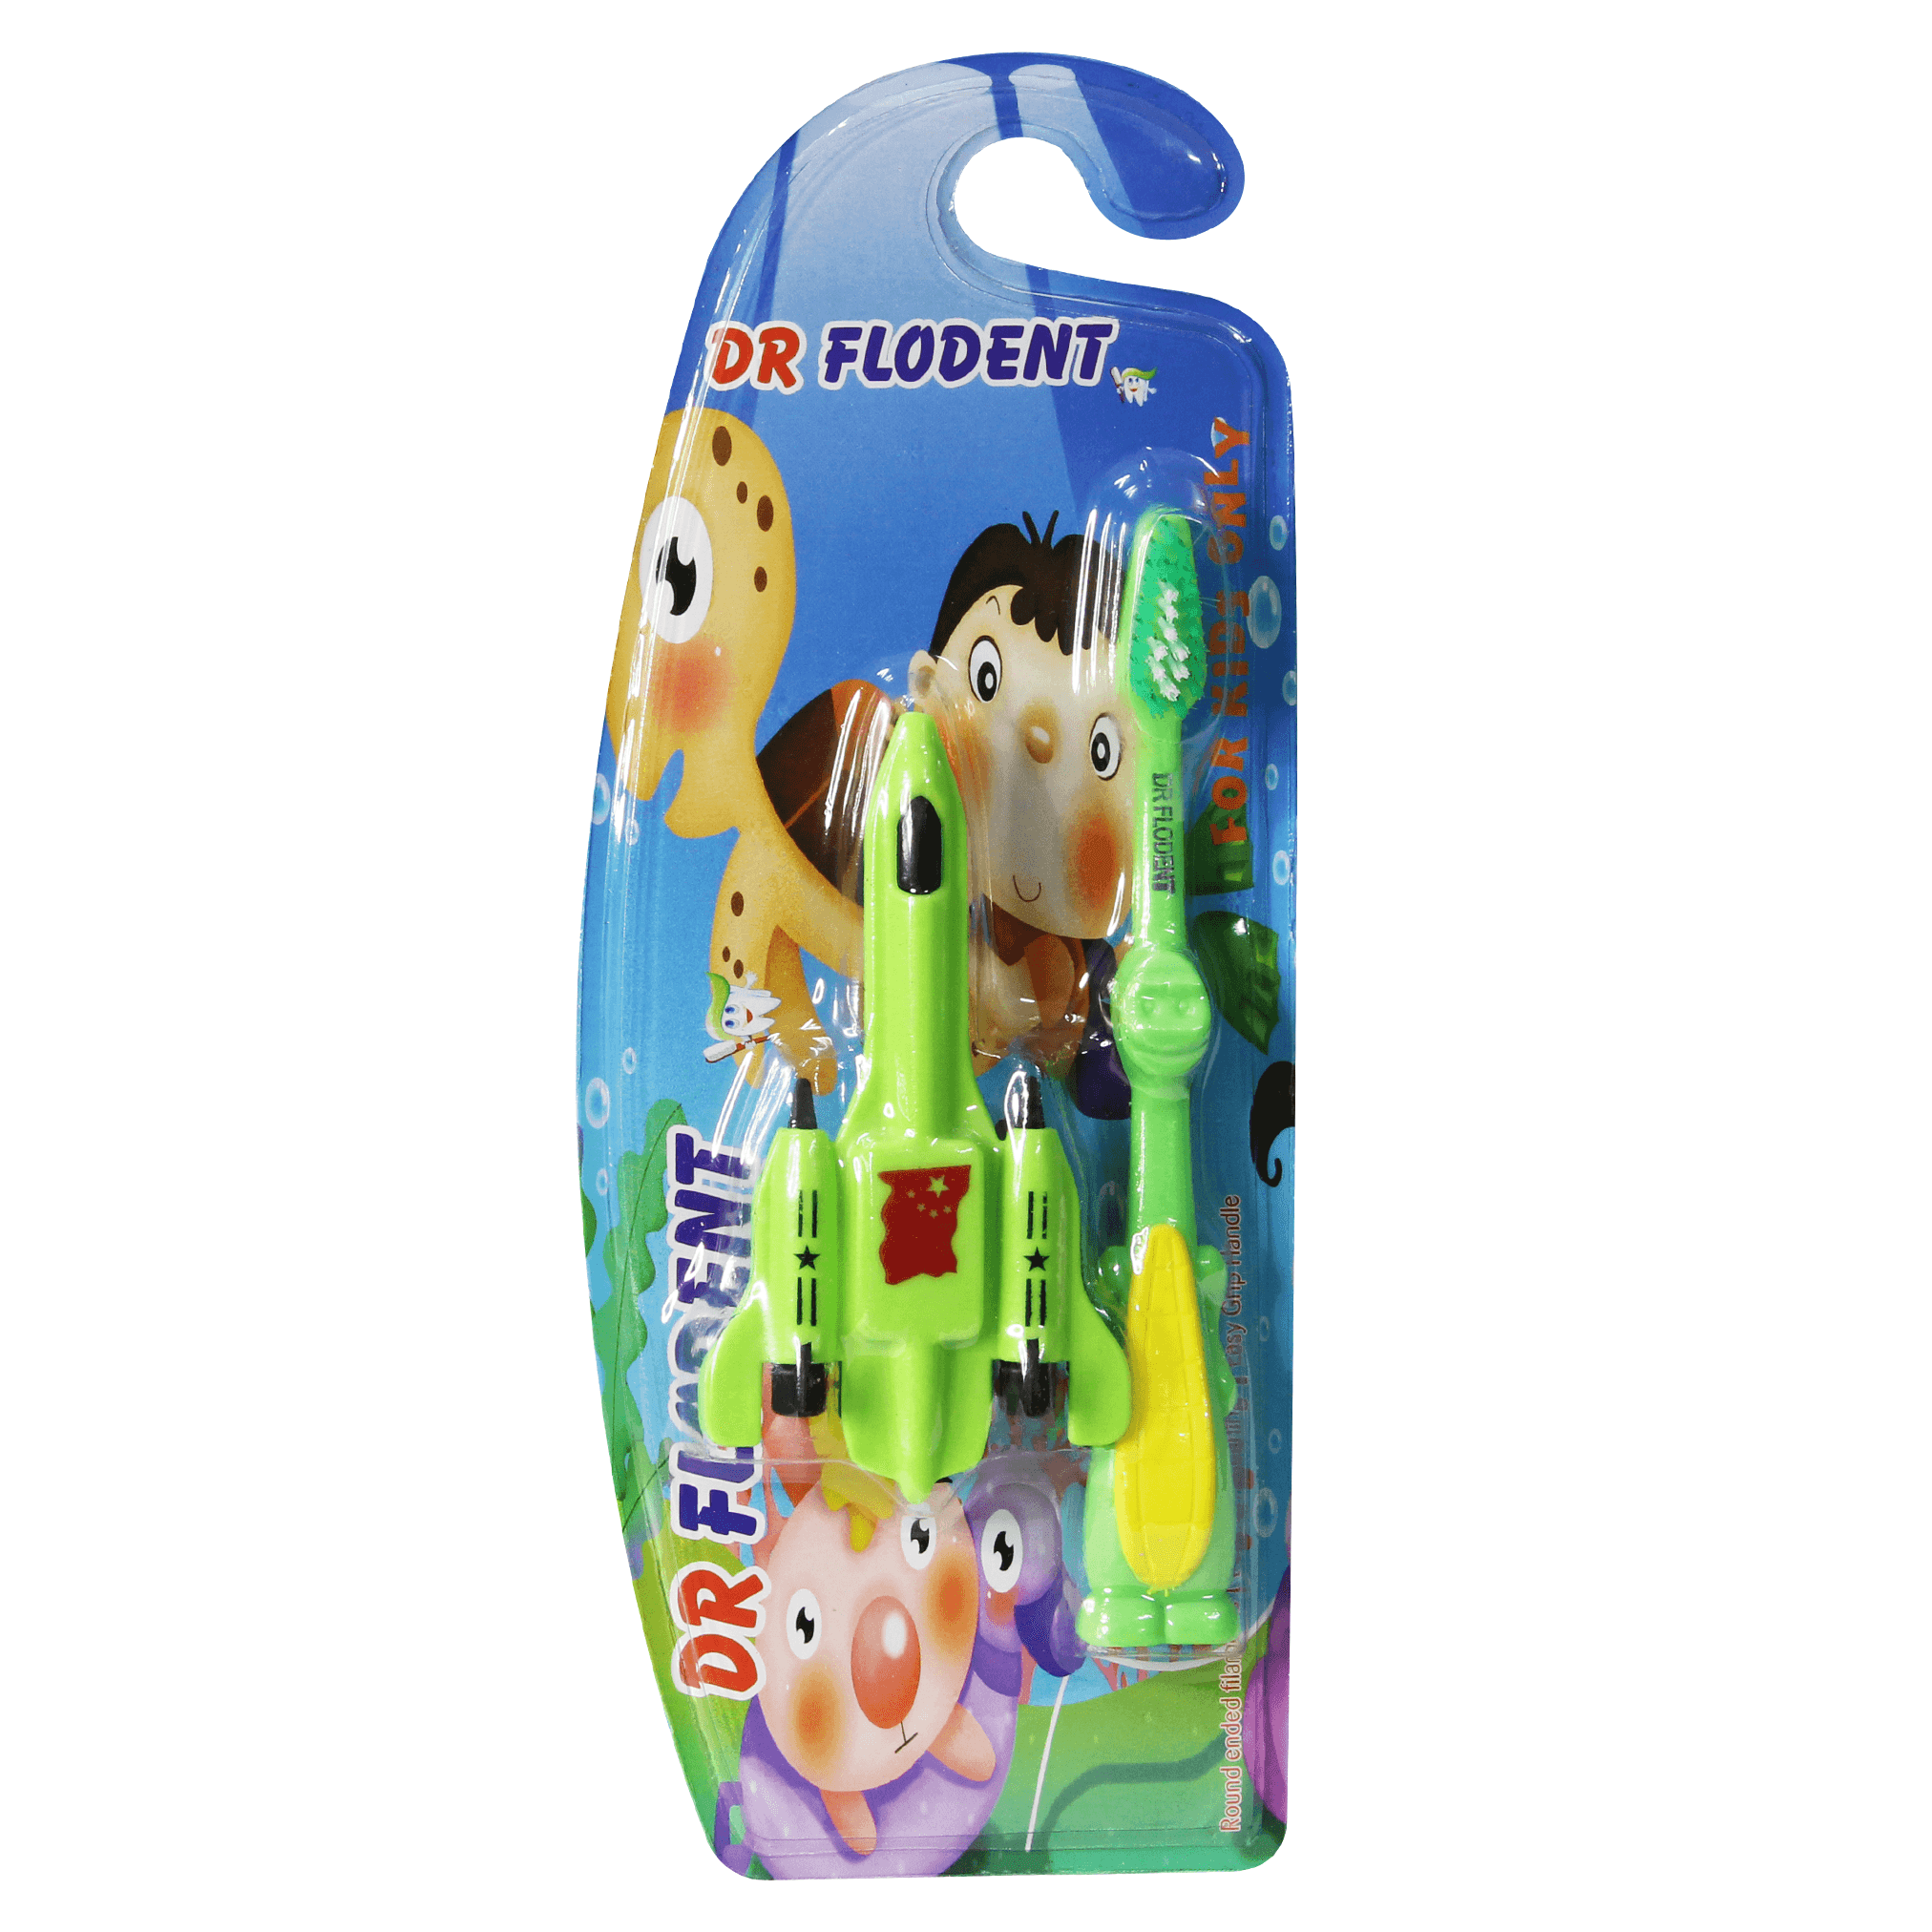 Dr Flodent Kids Toothbrush Extra Soft With Rocket Toy - BumbleToys - 2-4 Years, 5-7 Years, Baby Saftey & Health, Boys, Girls, Toothbrush